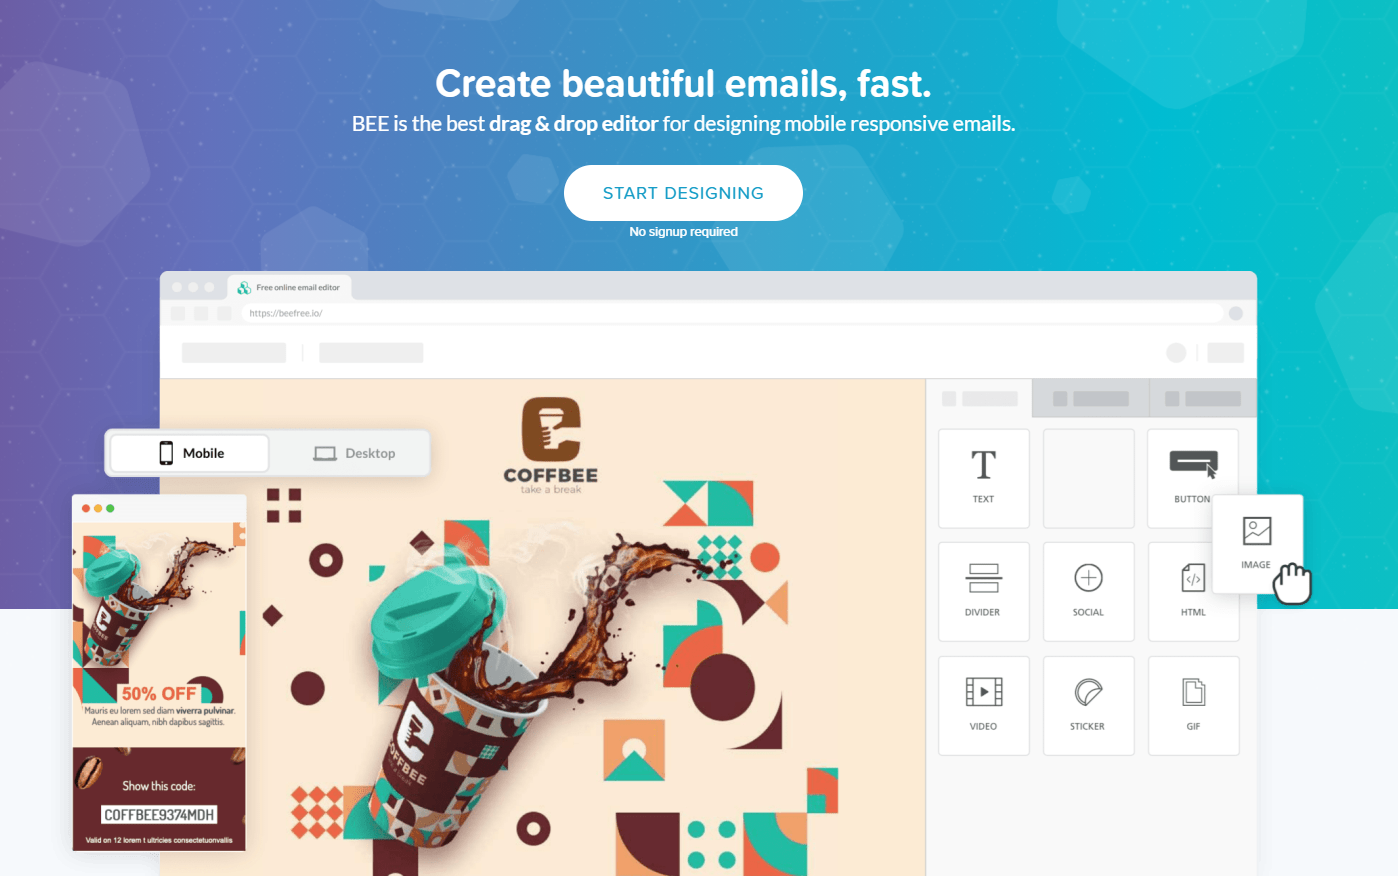 You can try our email editor on beefree.io within two clicks. No friction.